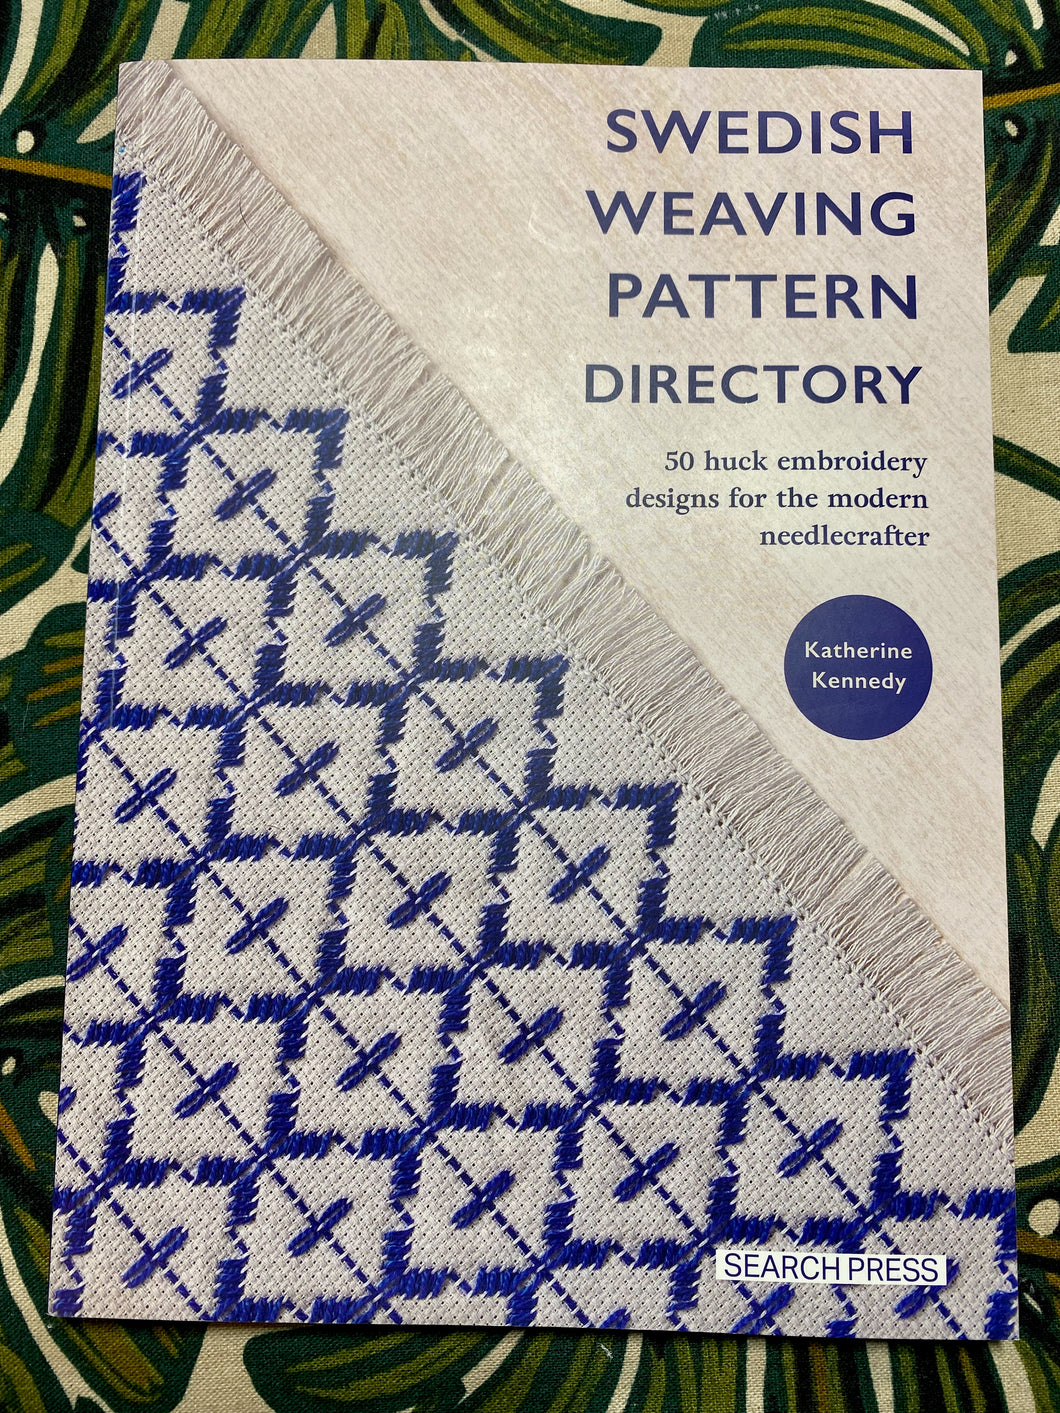 Swedish Weaving Pattern Directory: 50 huck embroidery designs for the modern needle crafter by Katherine Kennedy